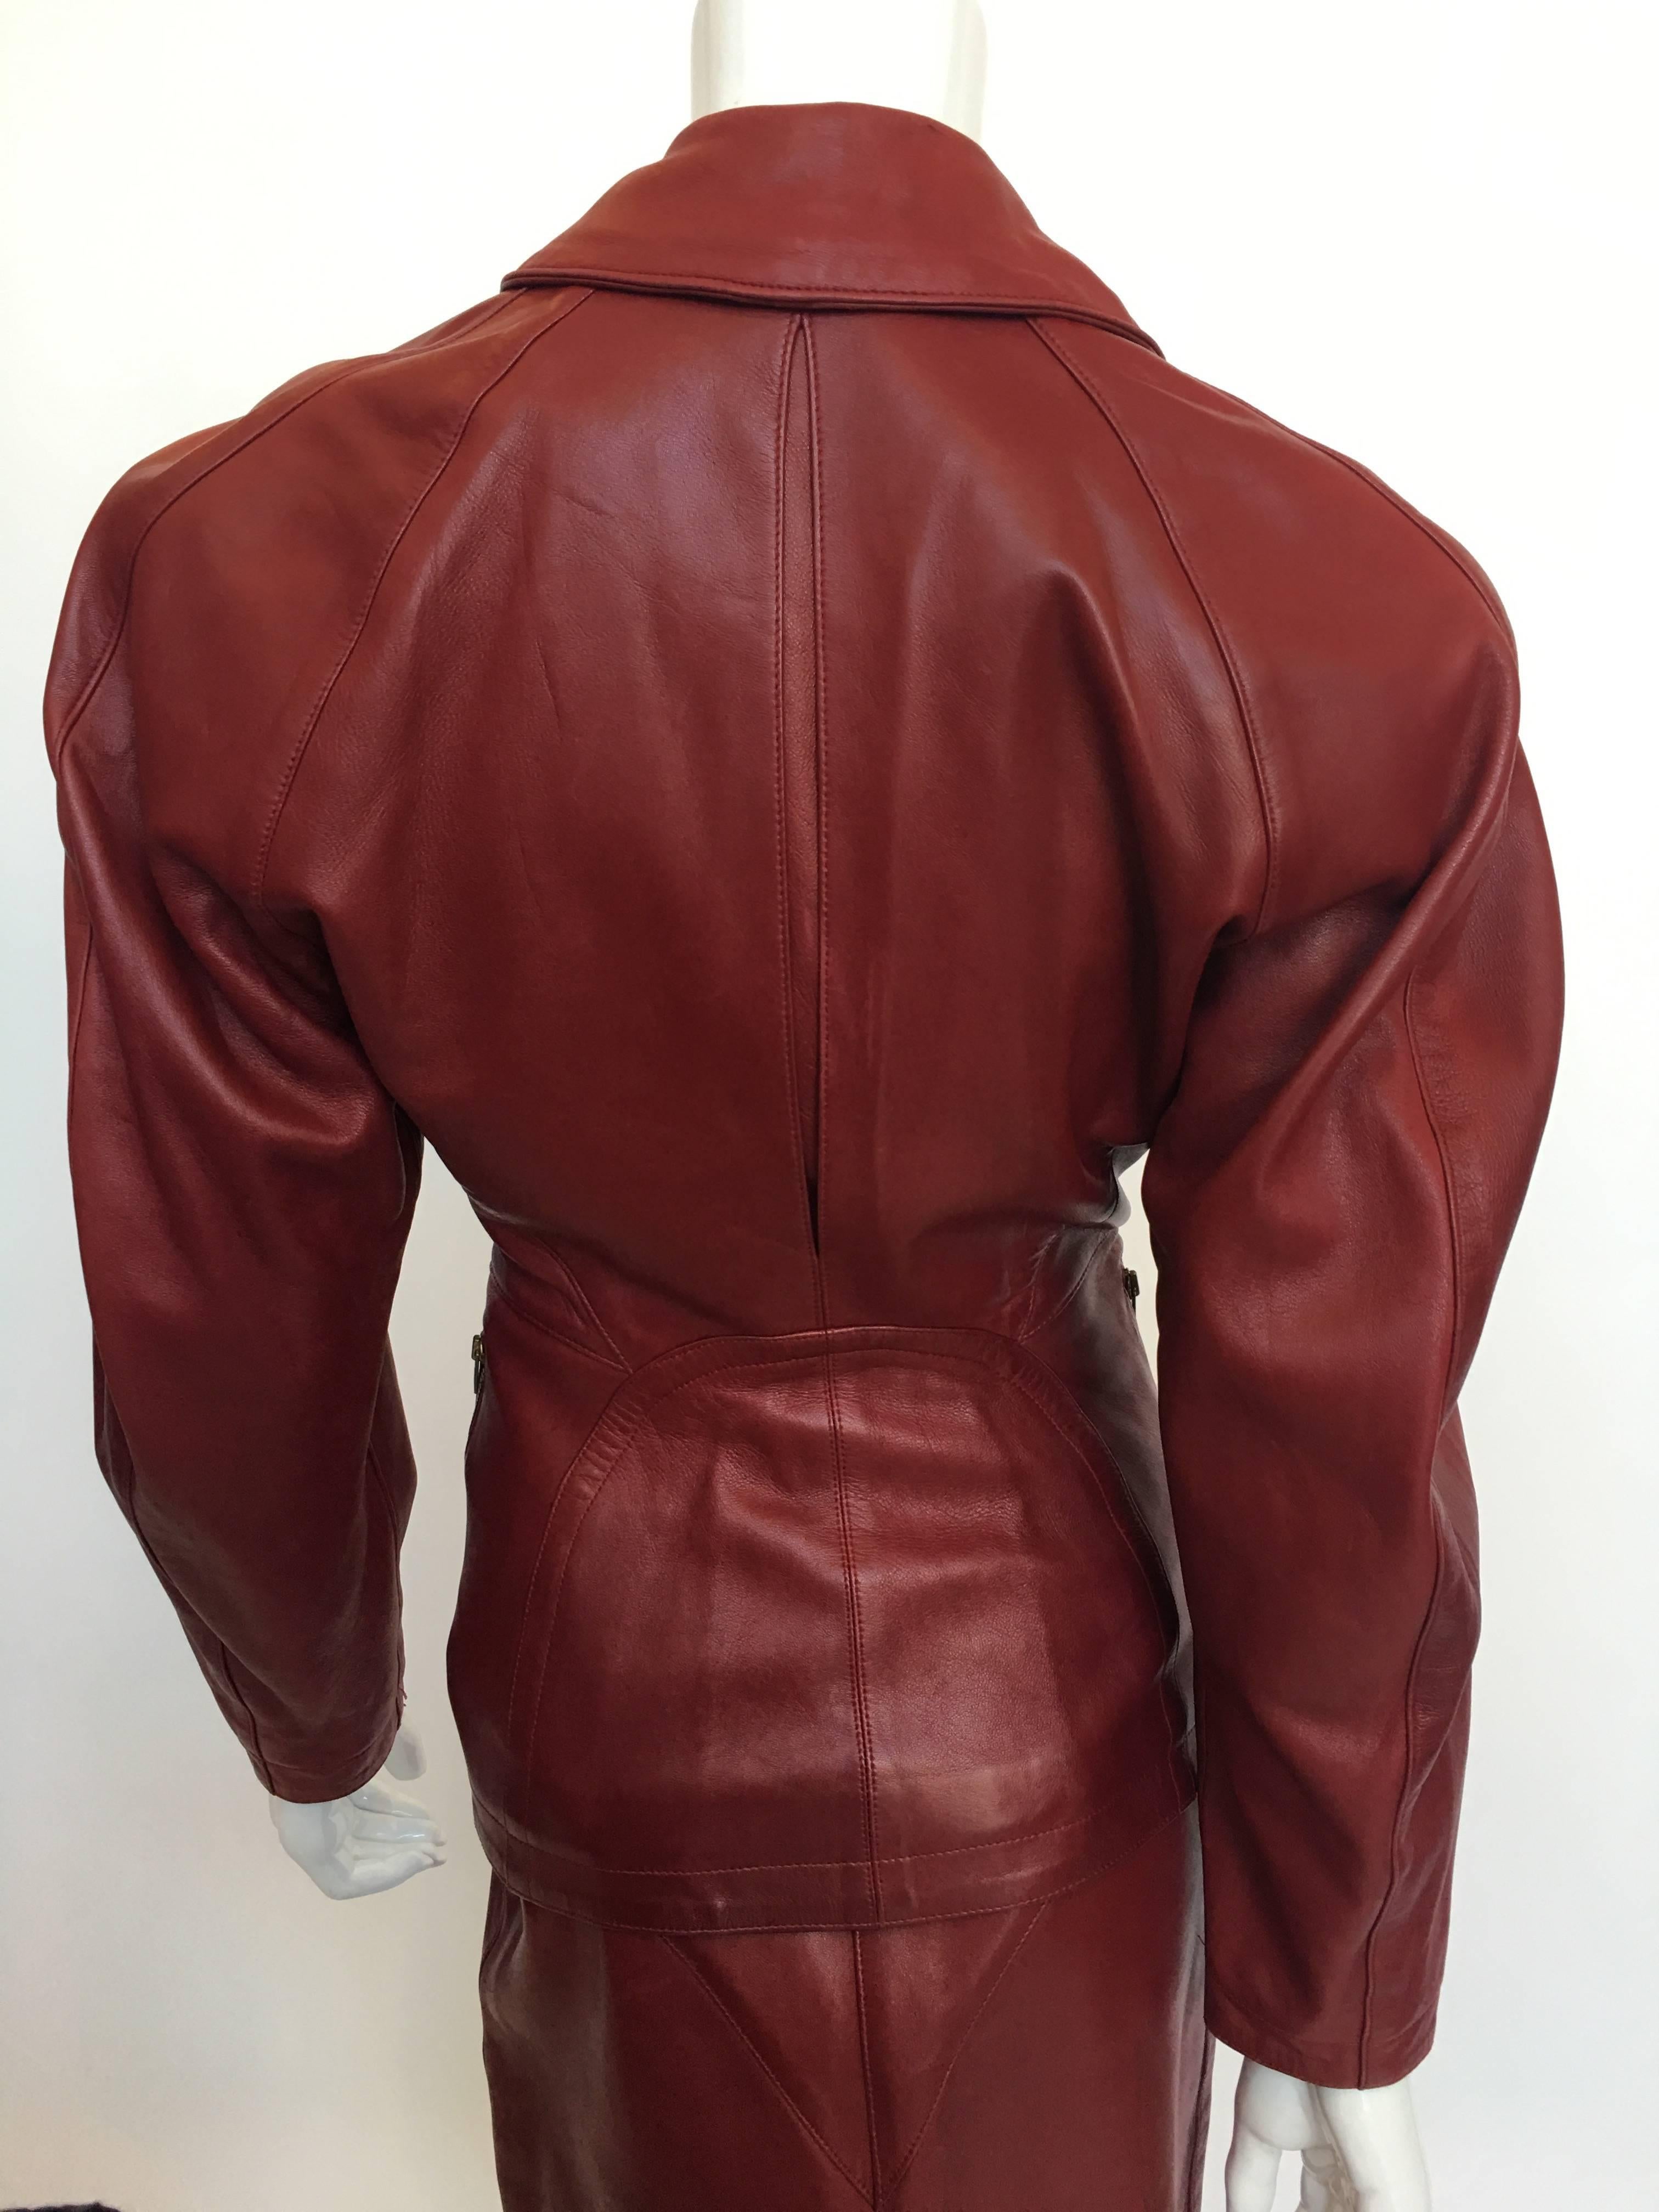 Alaïa 1980's Red Leather Skirt Suit In Good Condition For Sale In Los Angeles, CA